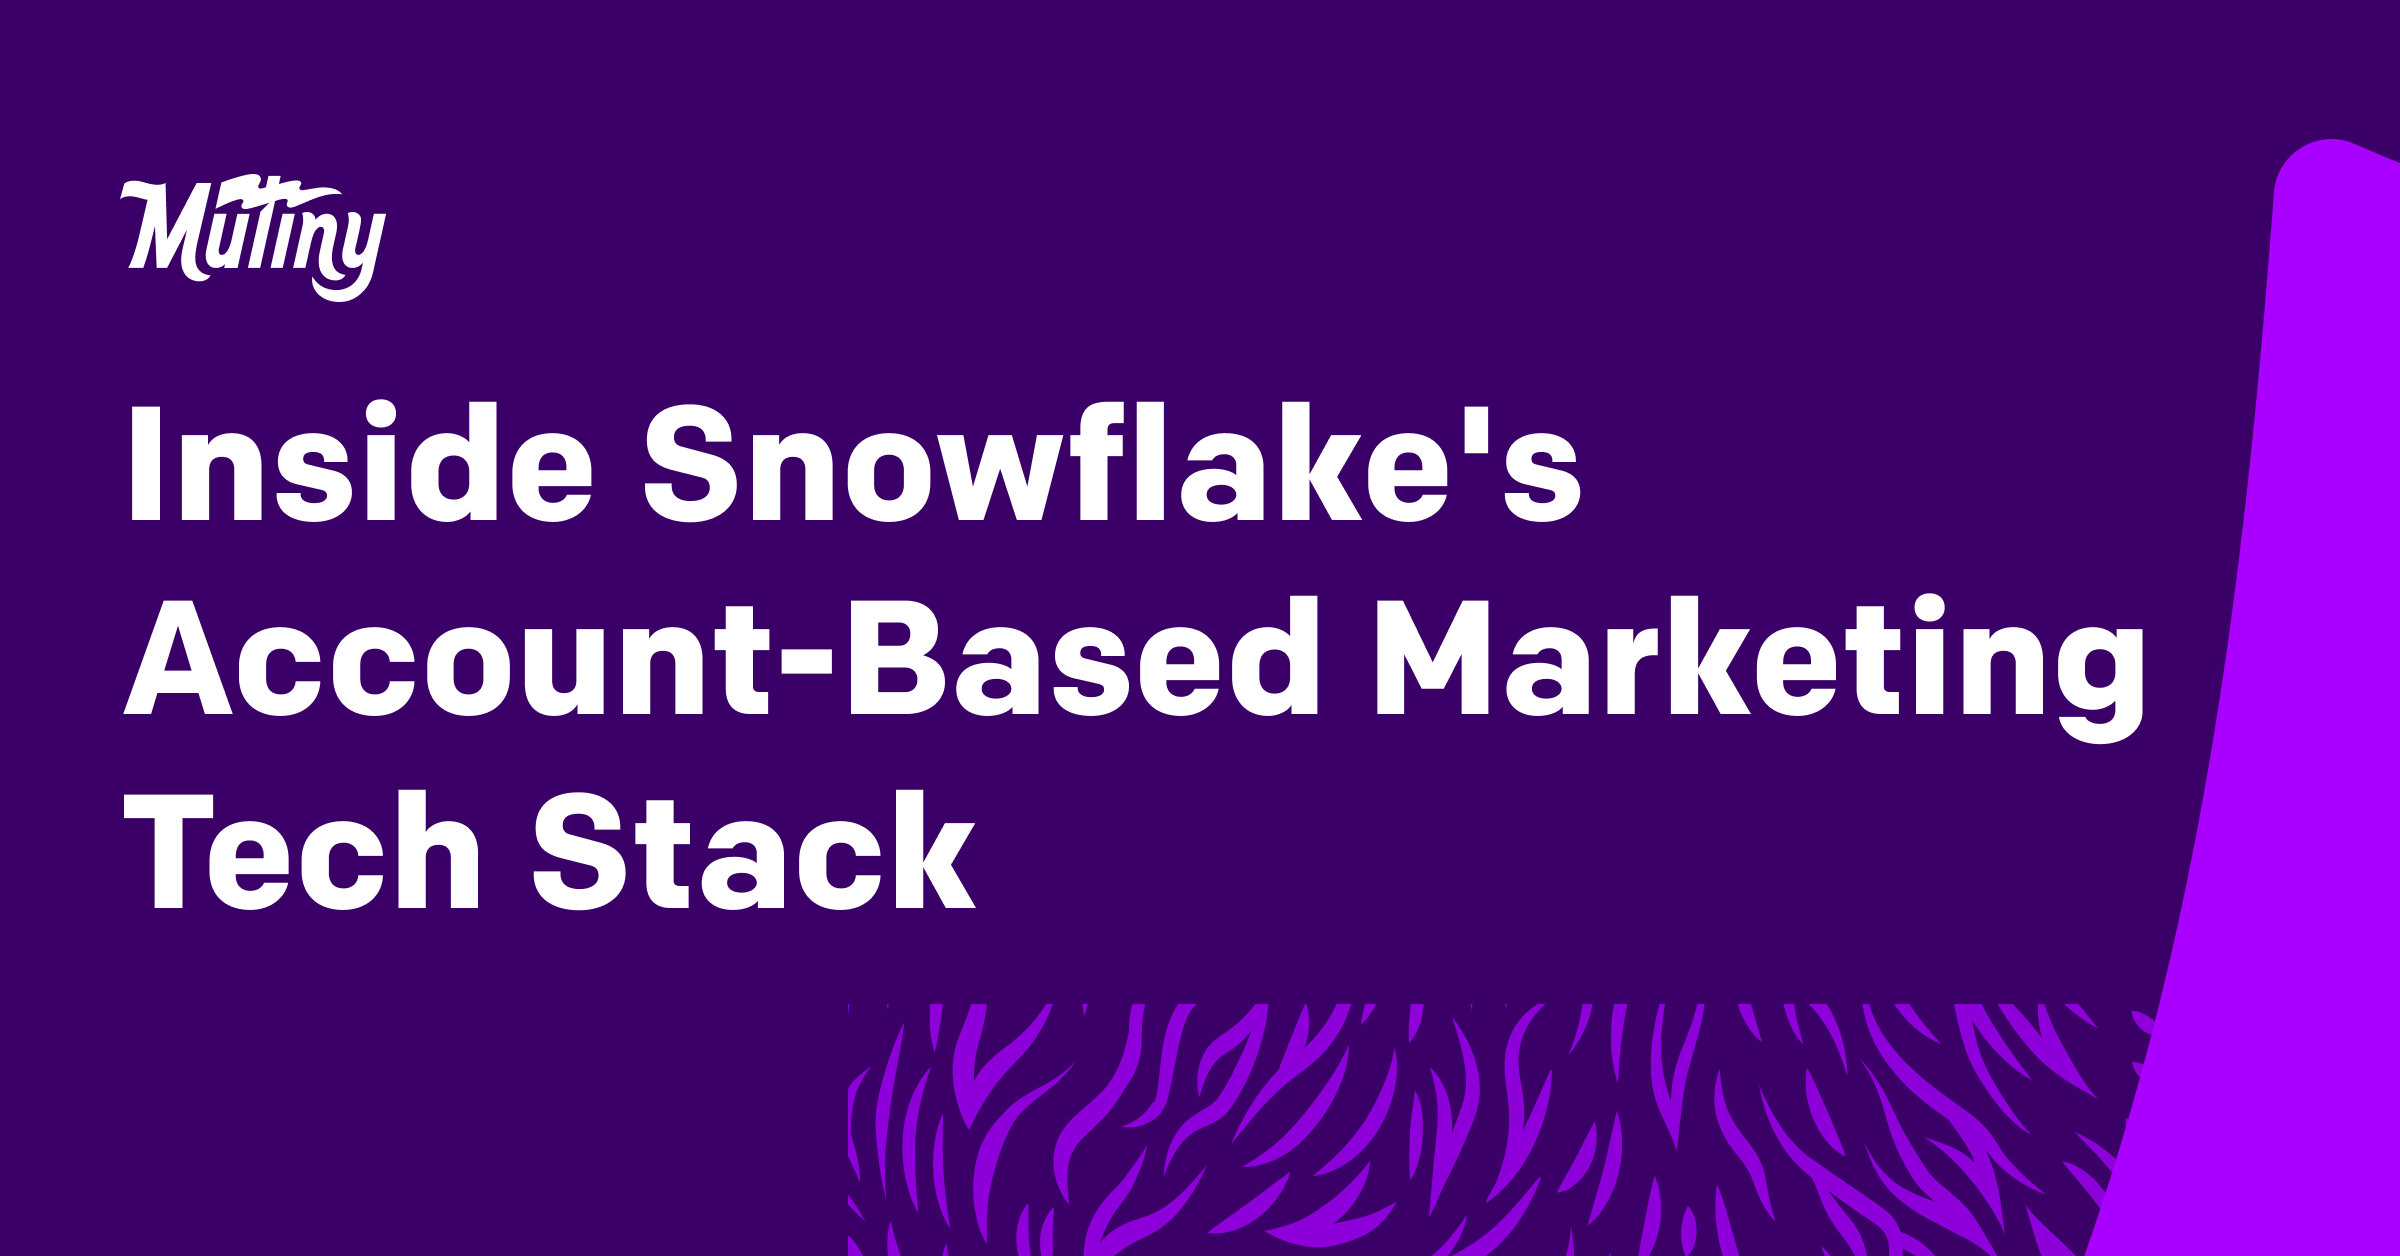 Inside Snowflake's Account-Based Marketing Tech Stack